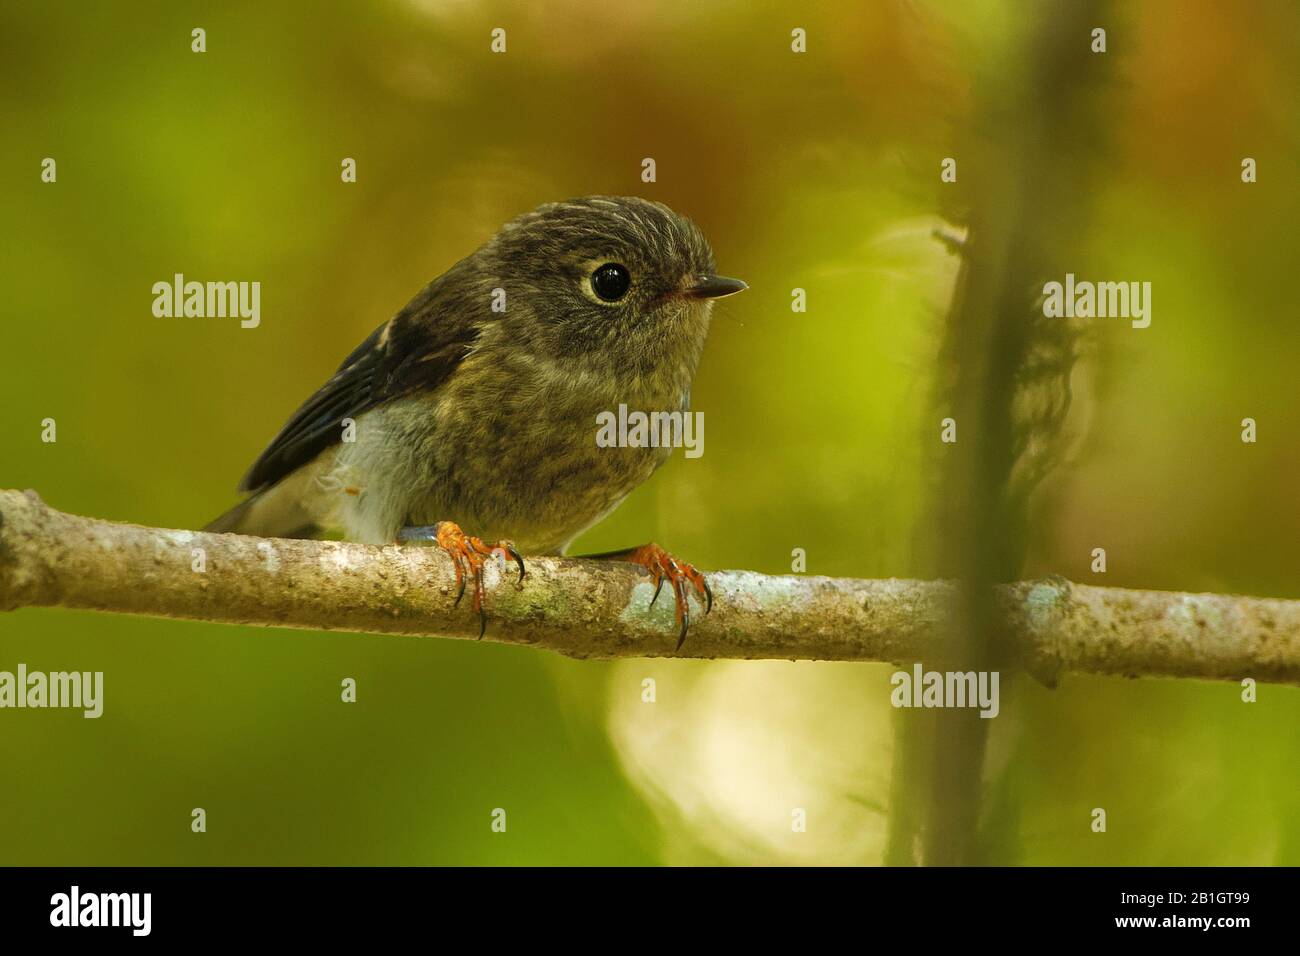 Petroica australis - South Island Robin - toutouwai - endemic New Zealand forest bird sitting on the branch in the forest. Stock Photo